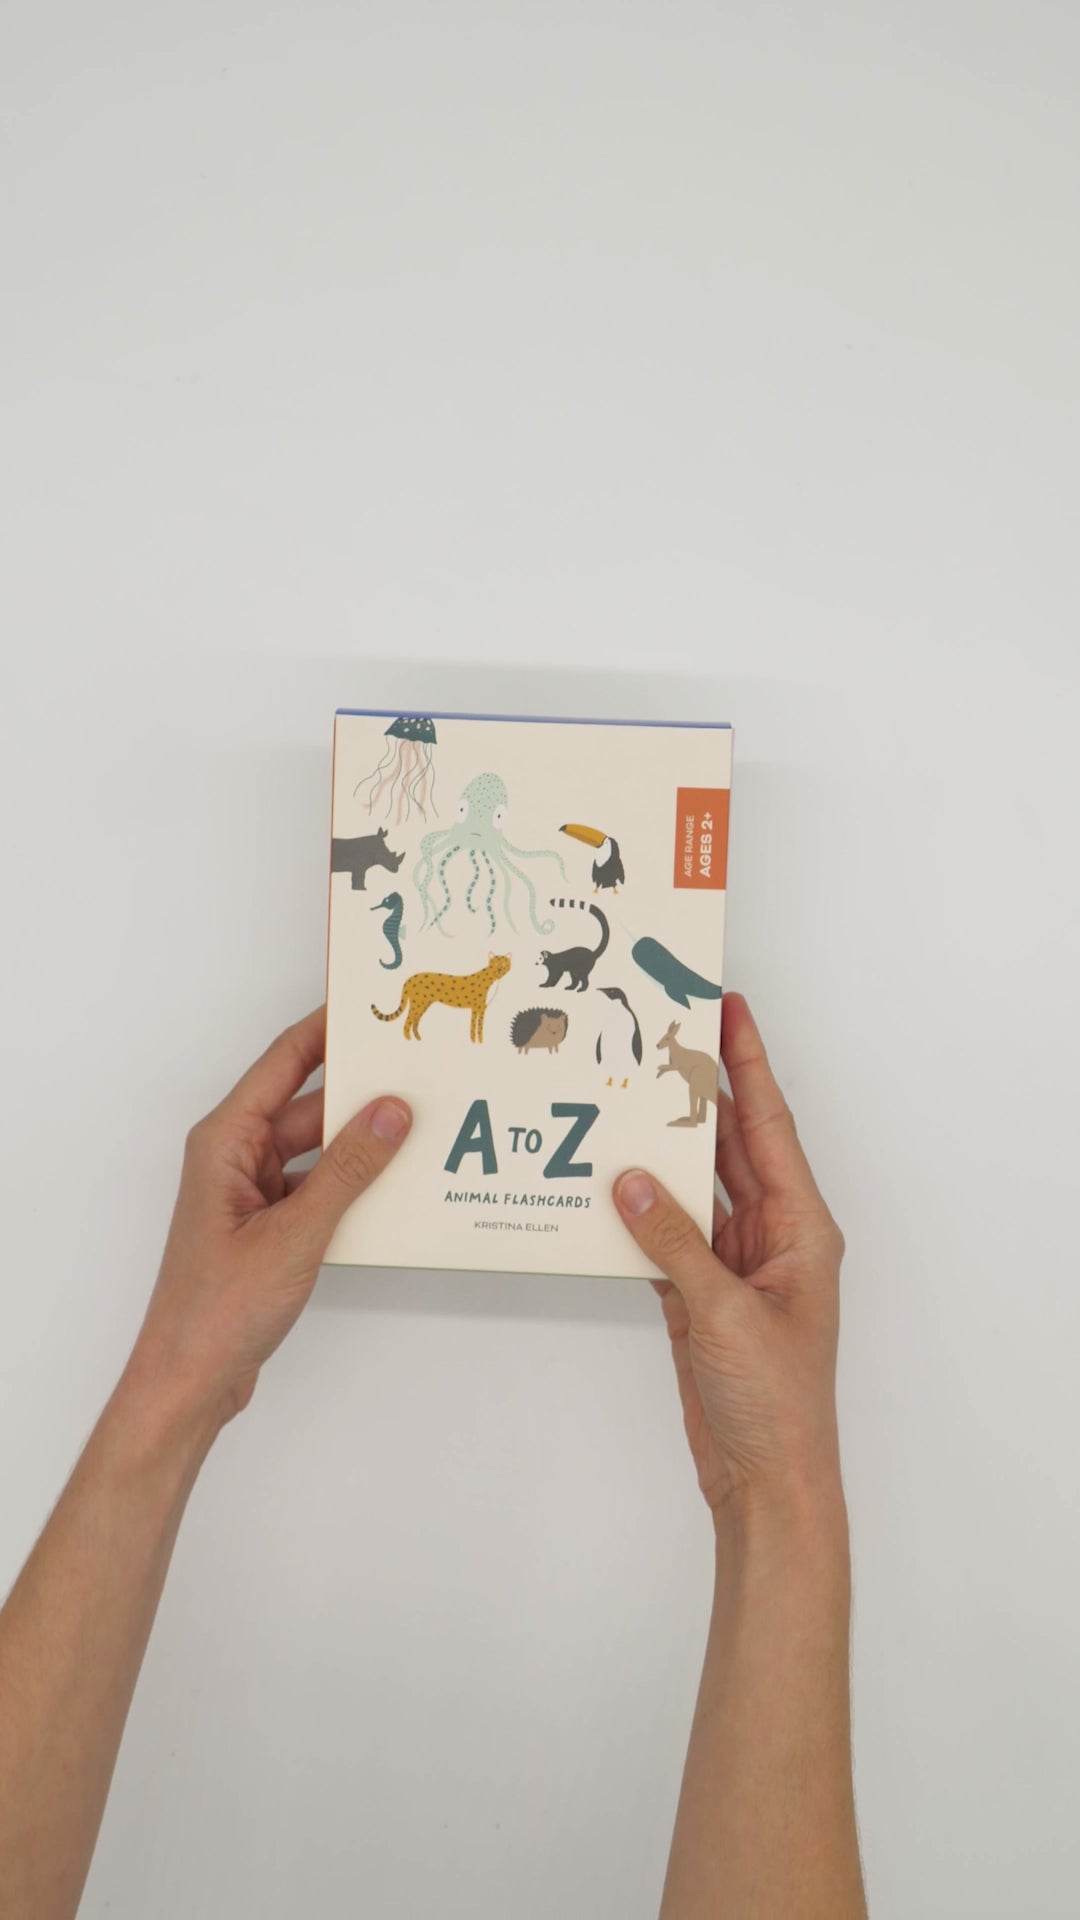 Video of A to Z Animal Flashcard Unboxing